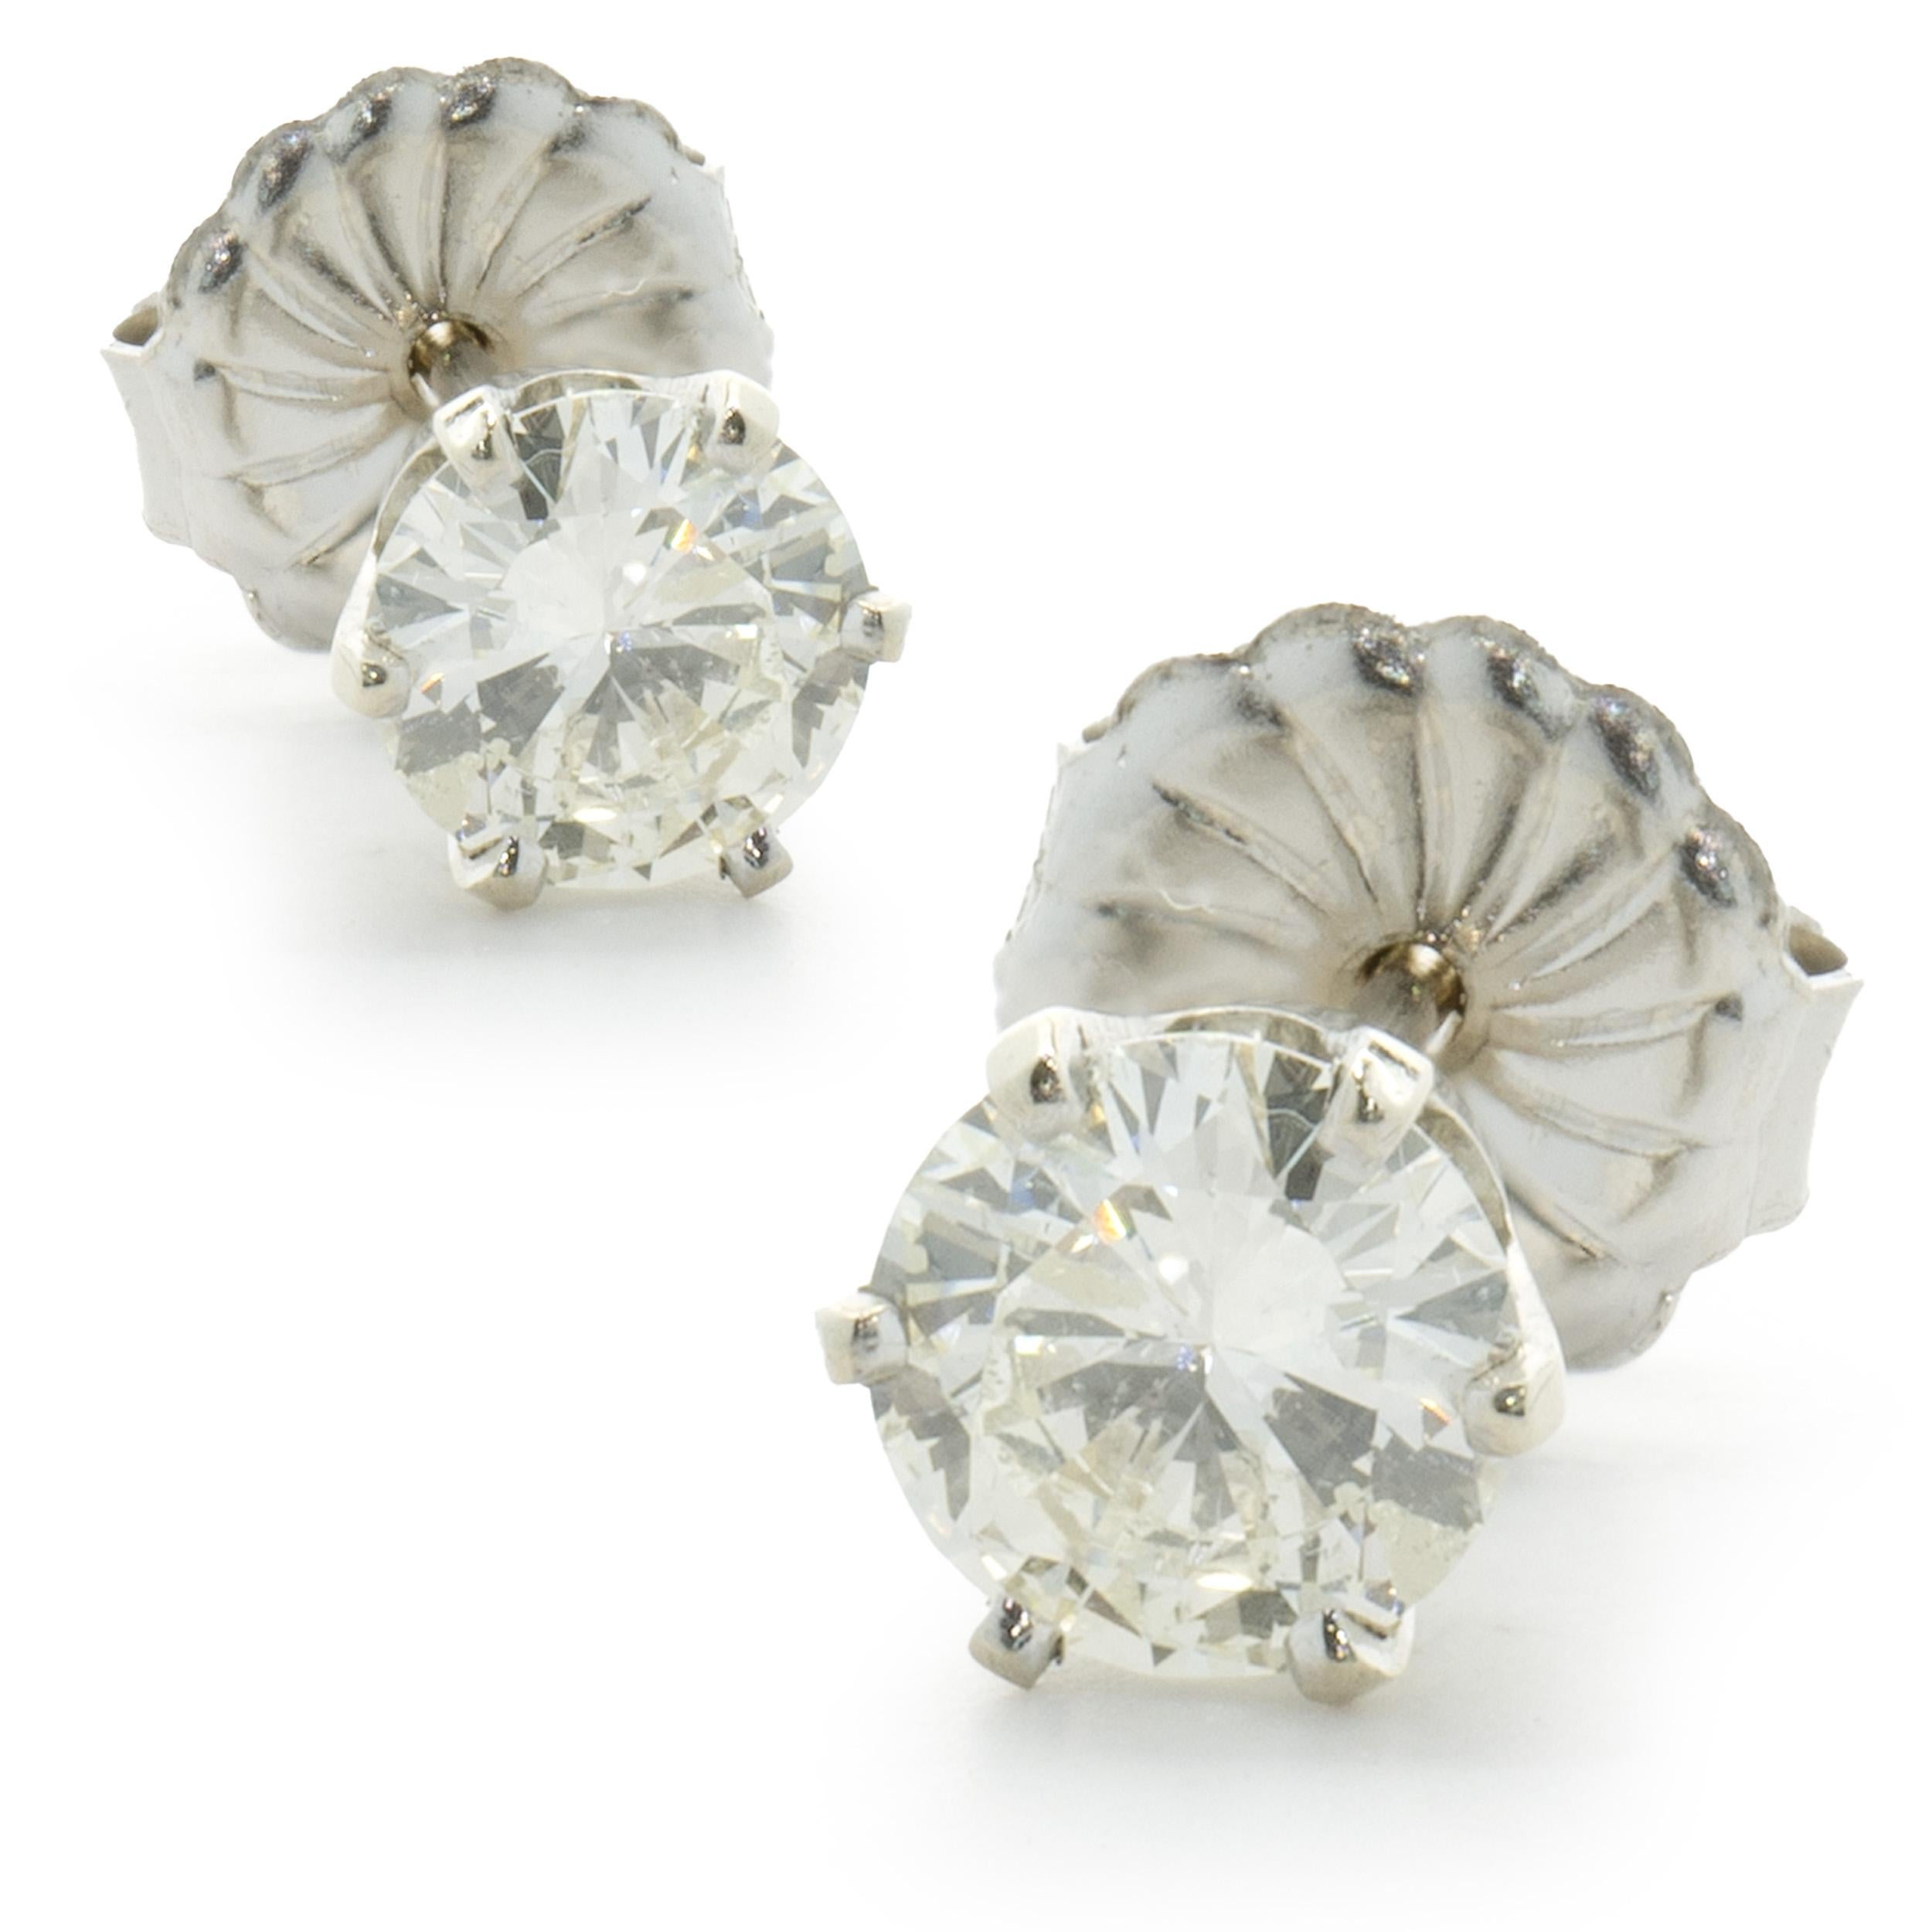 14 Karat White Gold Round Cut Diamond Stud Earrings In Excellent Condition For Sale In Scottsdale, AZ